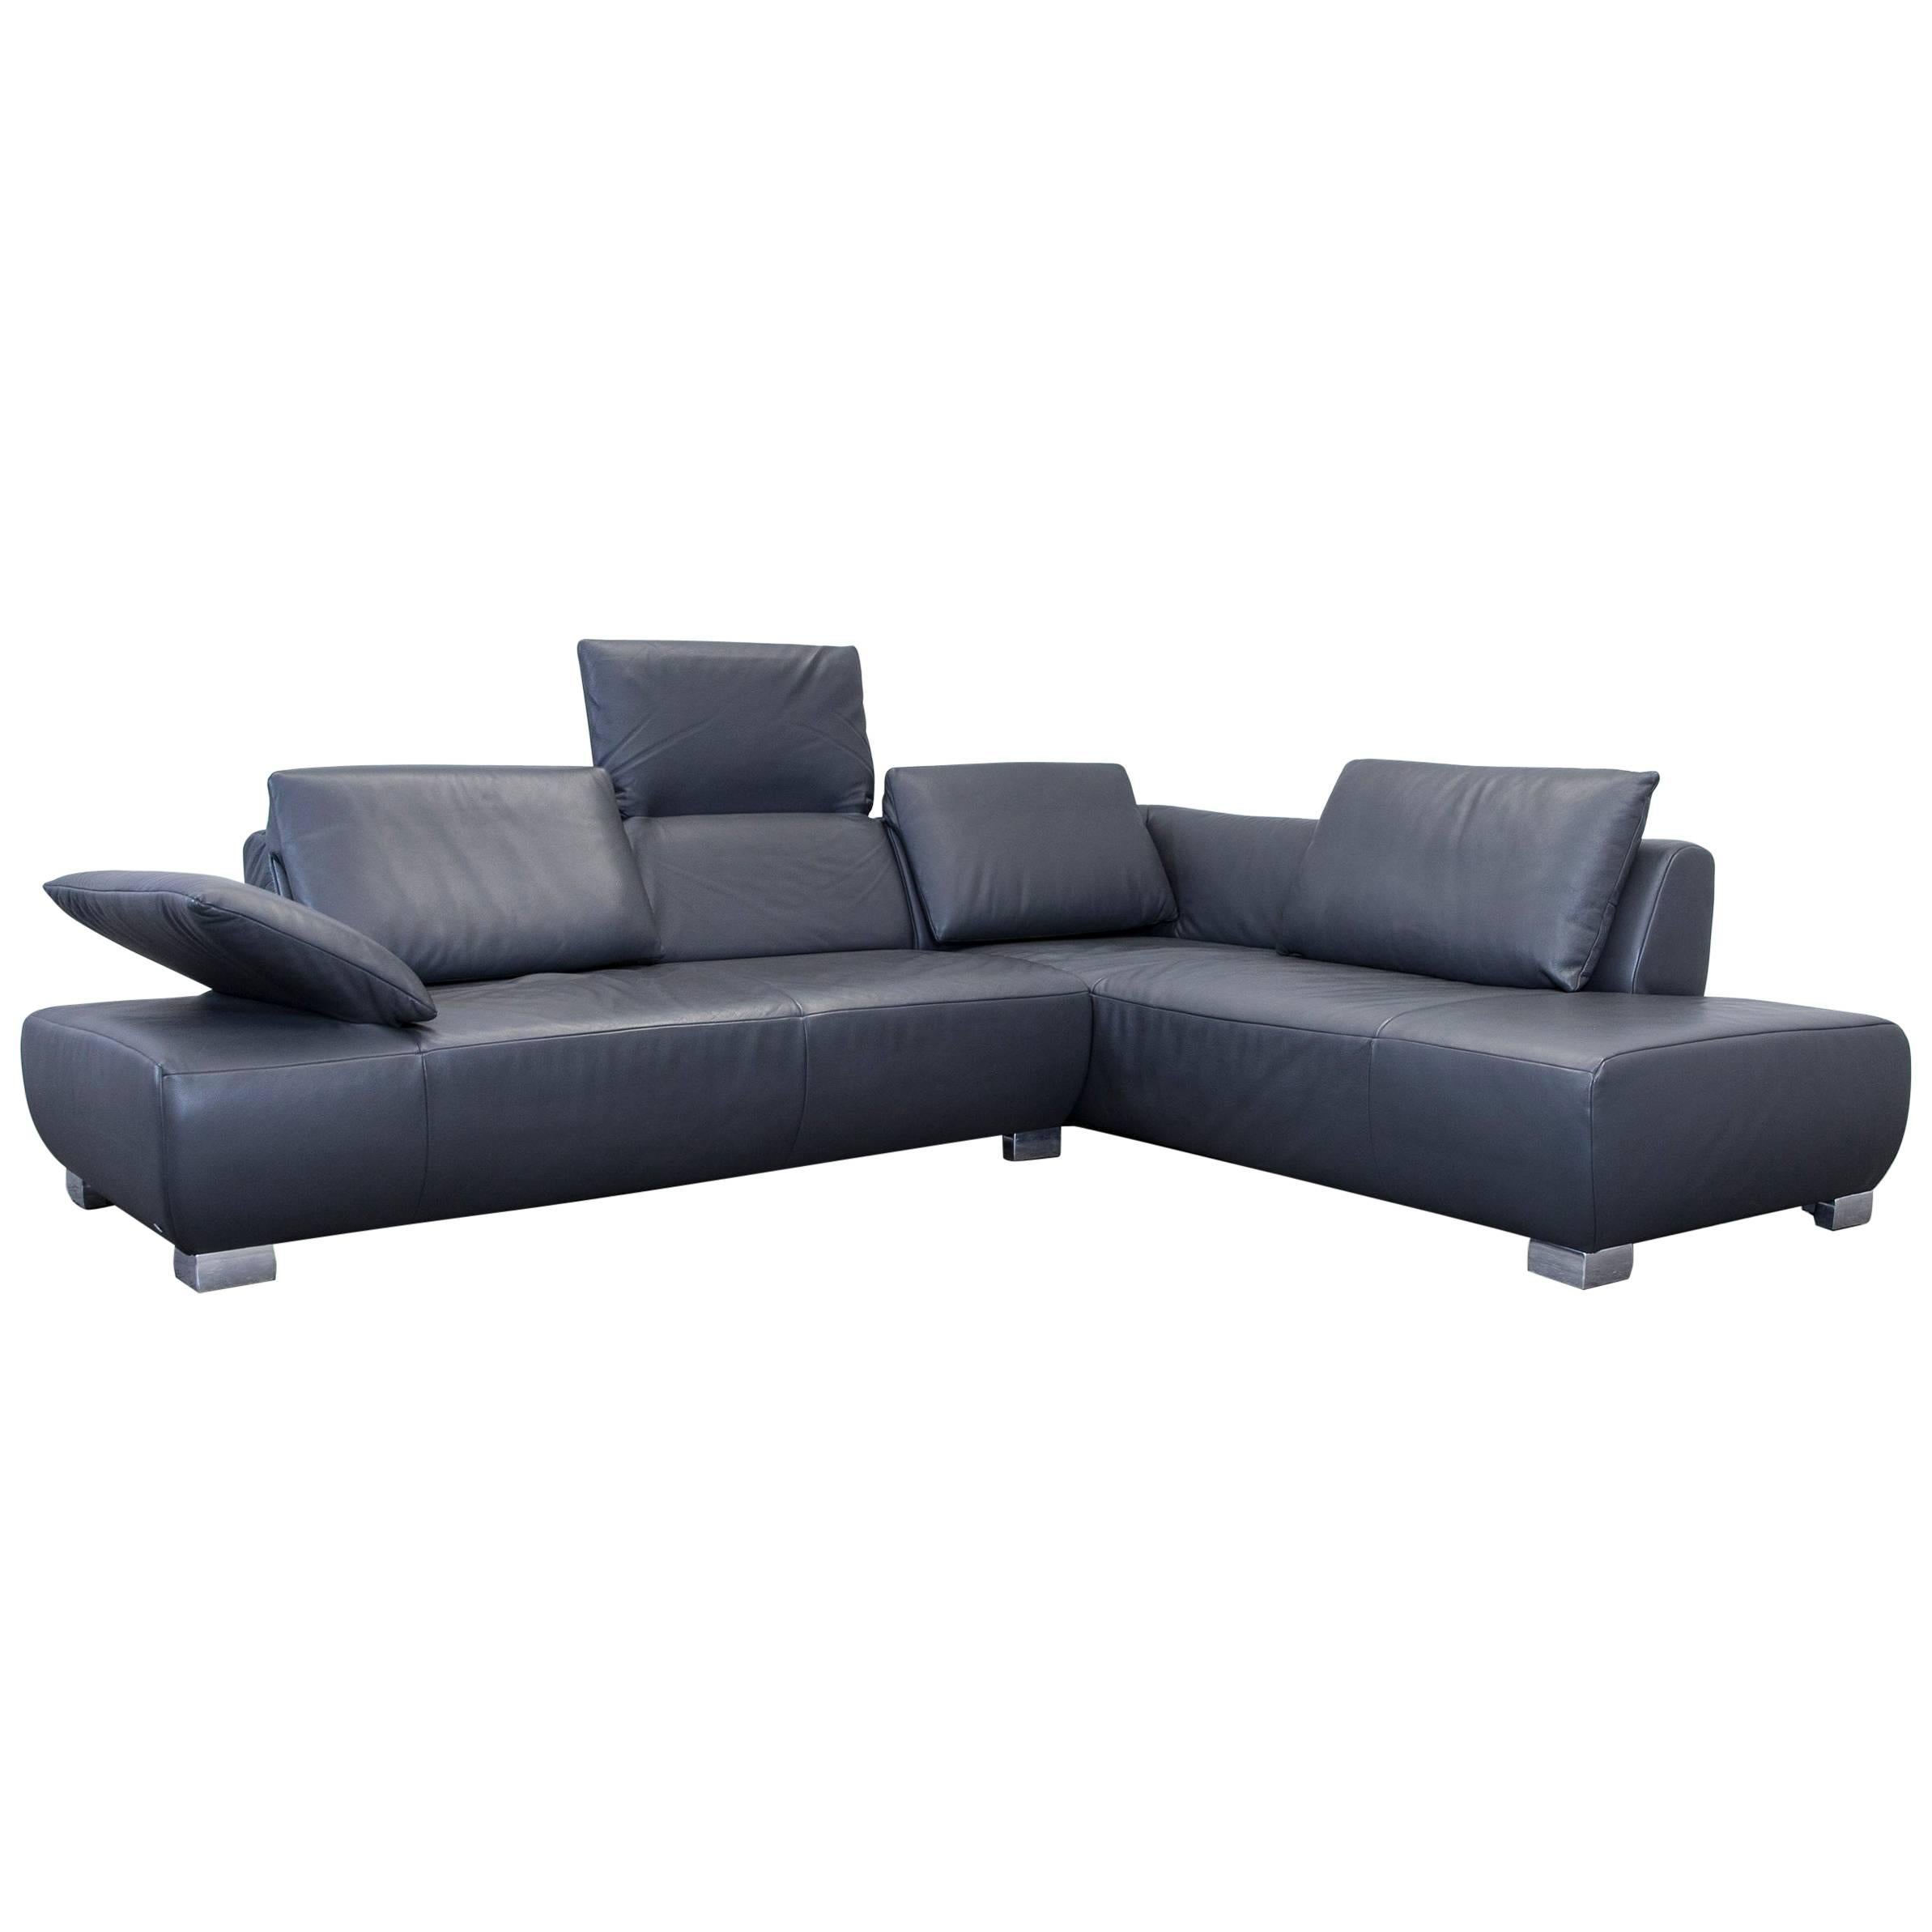 Koinor Volare Leather Corner Sofa Grey Anthracite Function Couch